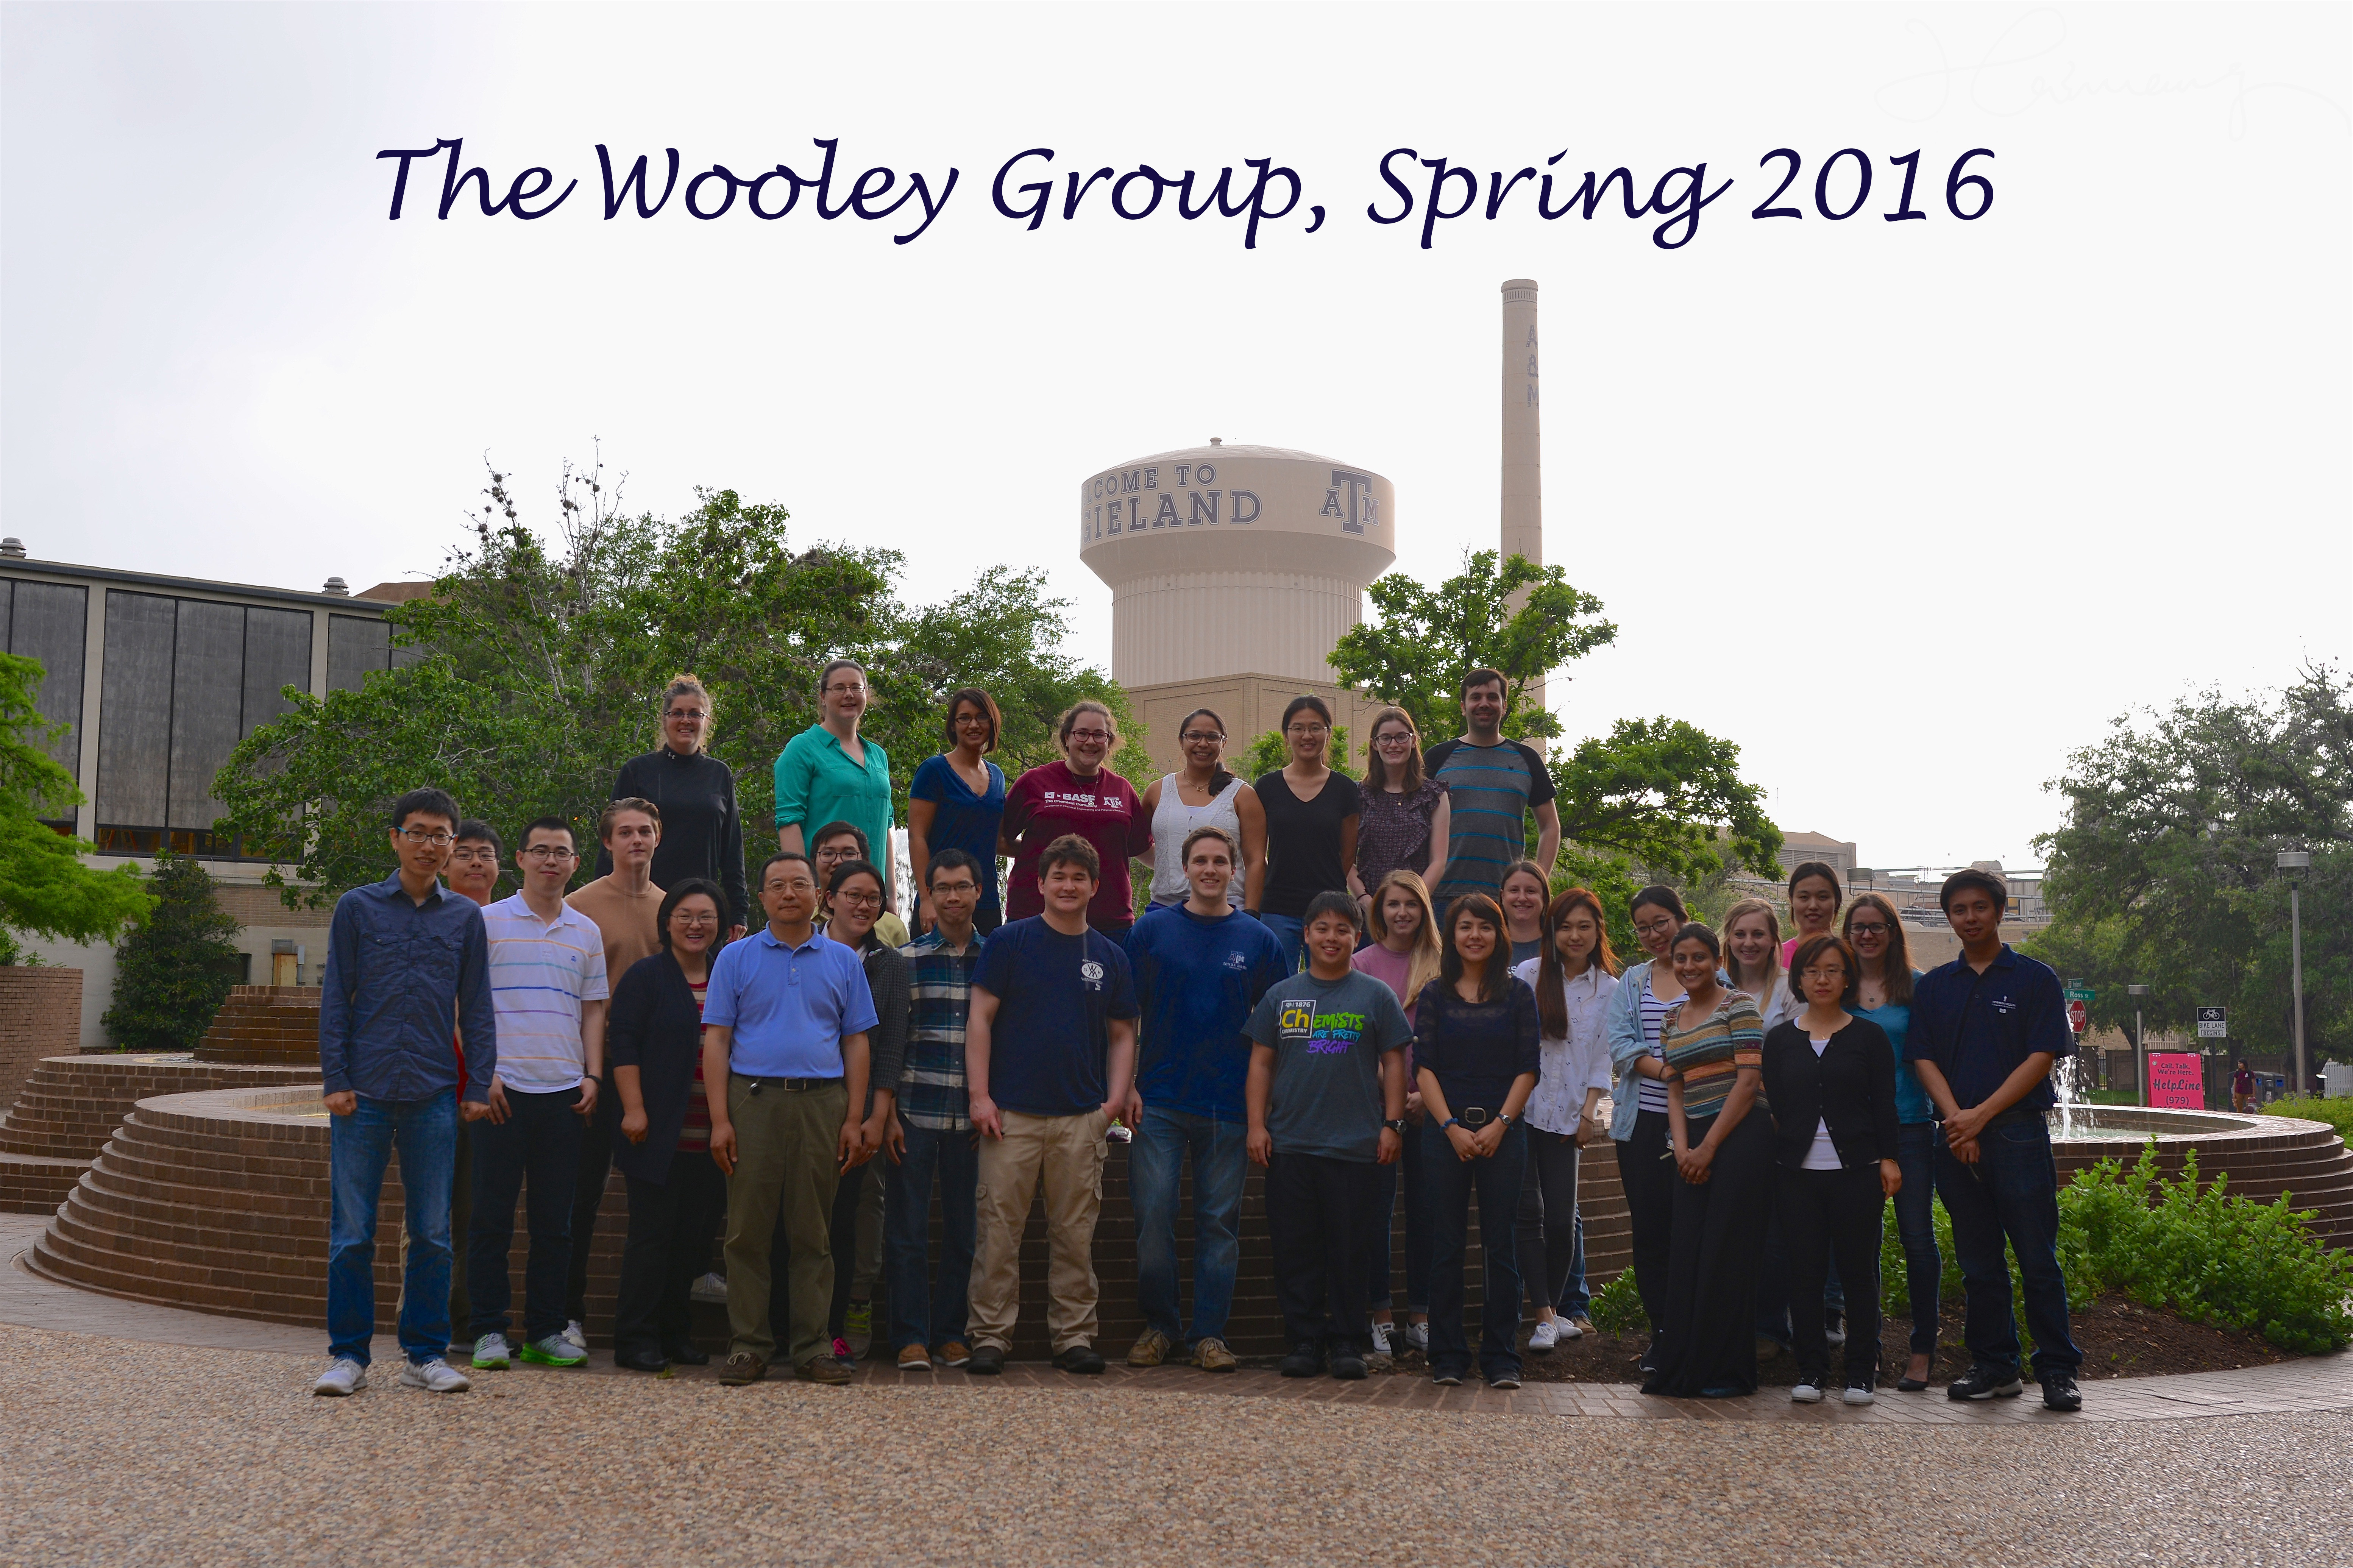 Wooley Group, Spring 2016